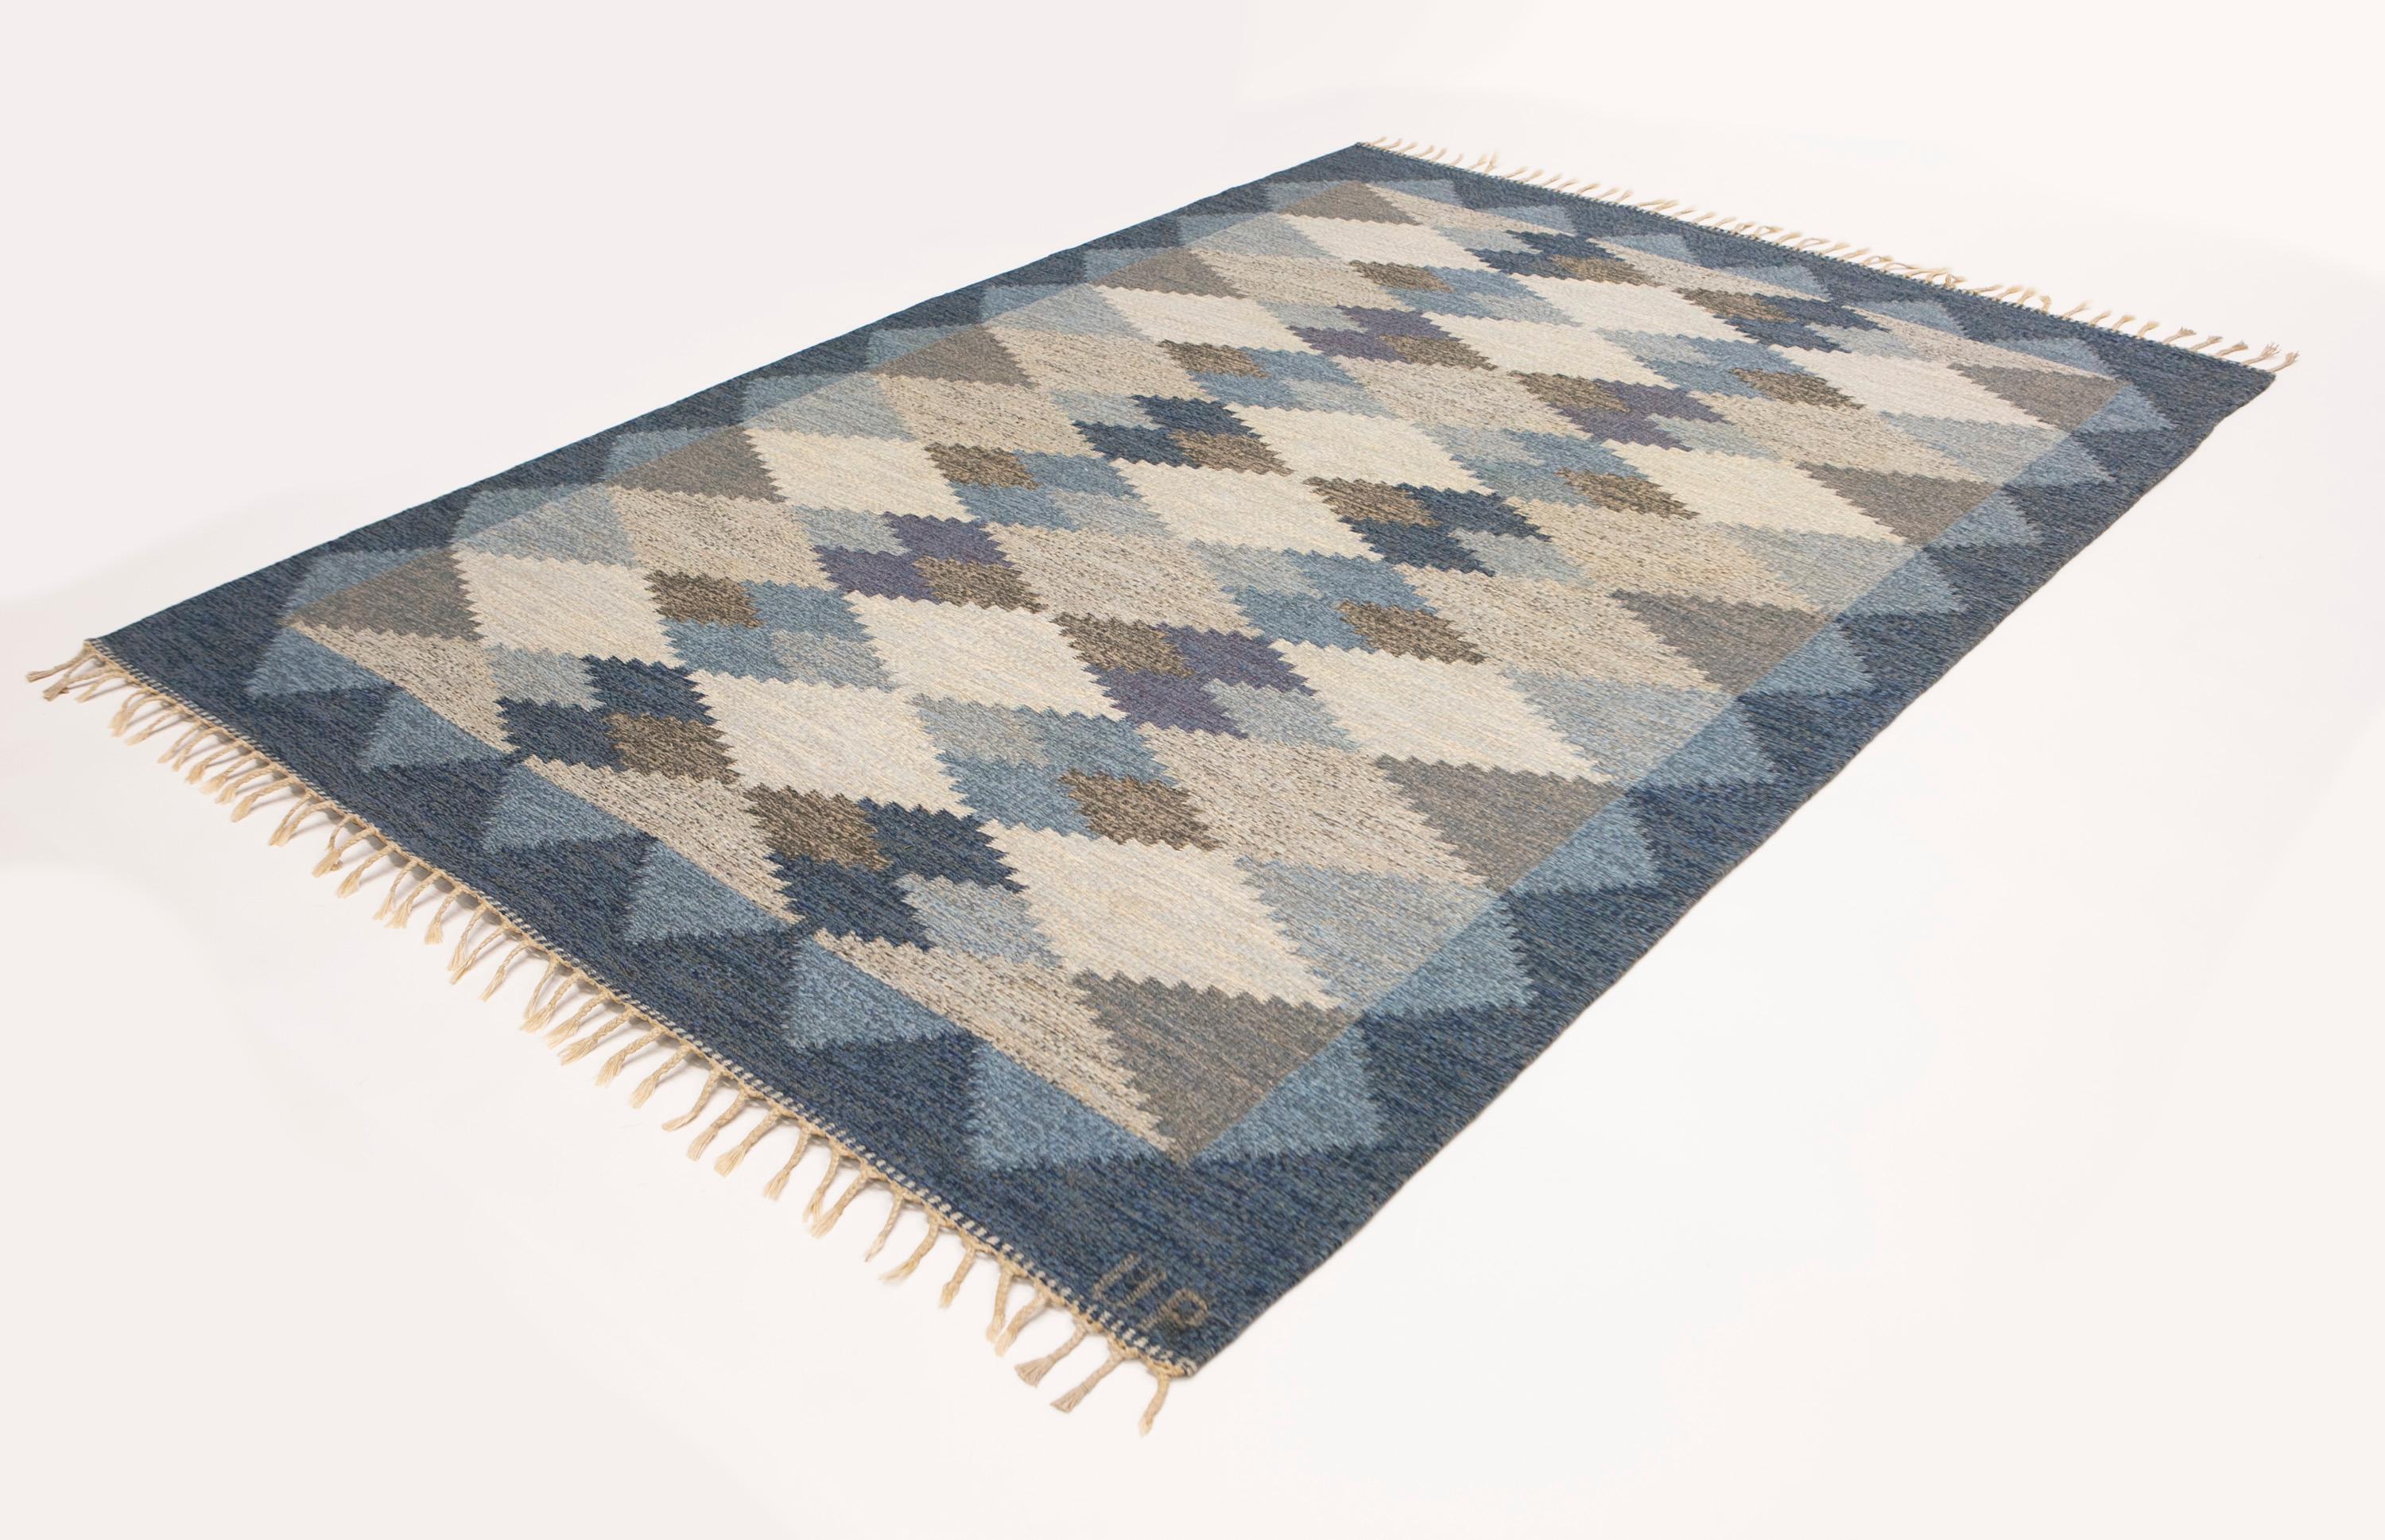 Ulla Parkdal Blue Grey Swedish Flat Weave Hand Woven Rug - Sweden, Swedish 1960s

This handwoven rug has a classic and timeless design. Bordered with connected triangles of Blue and pale blue with a table fo grey and ivory diamonds with muted